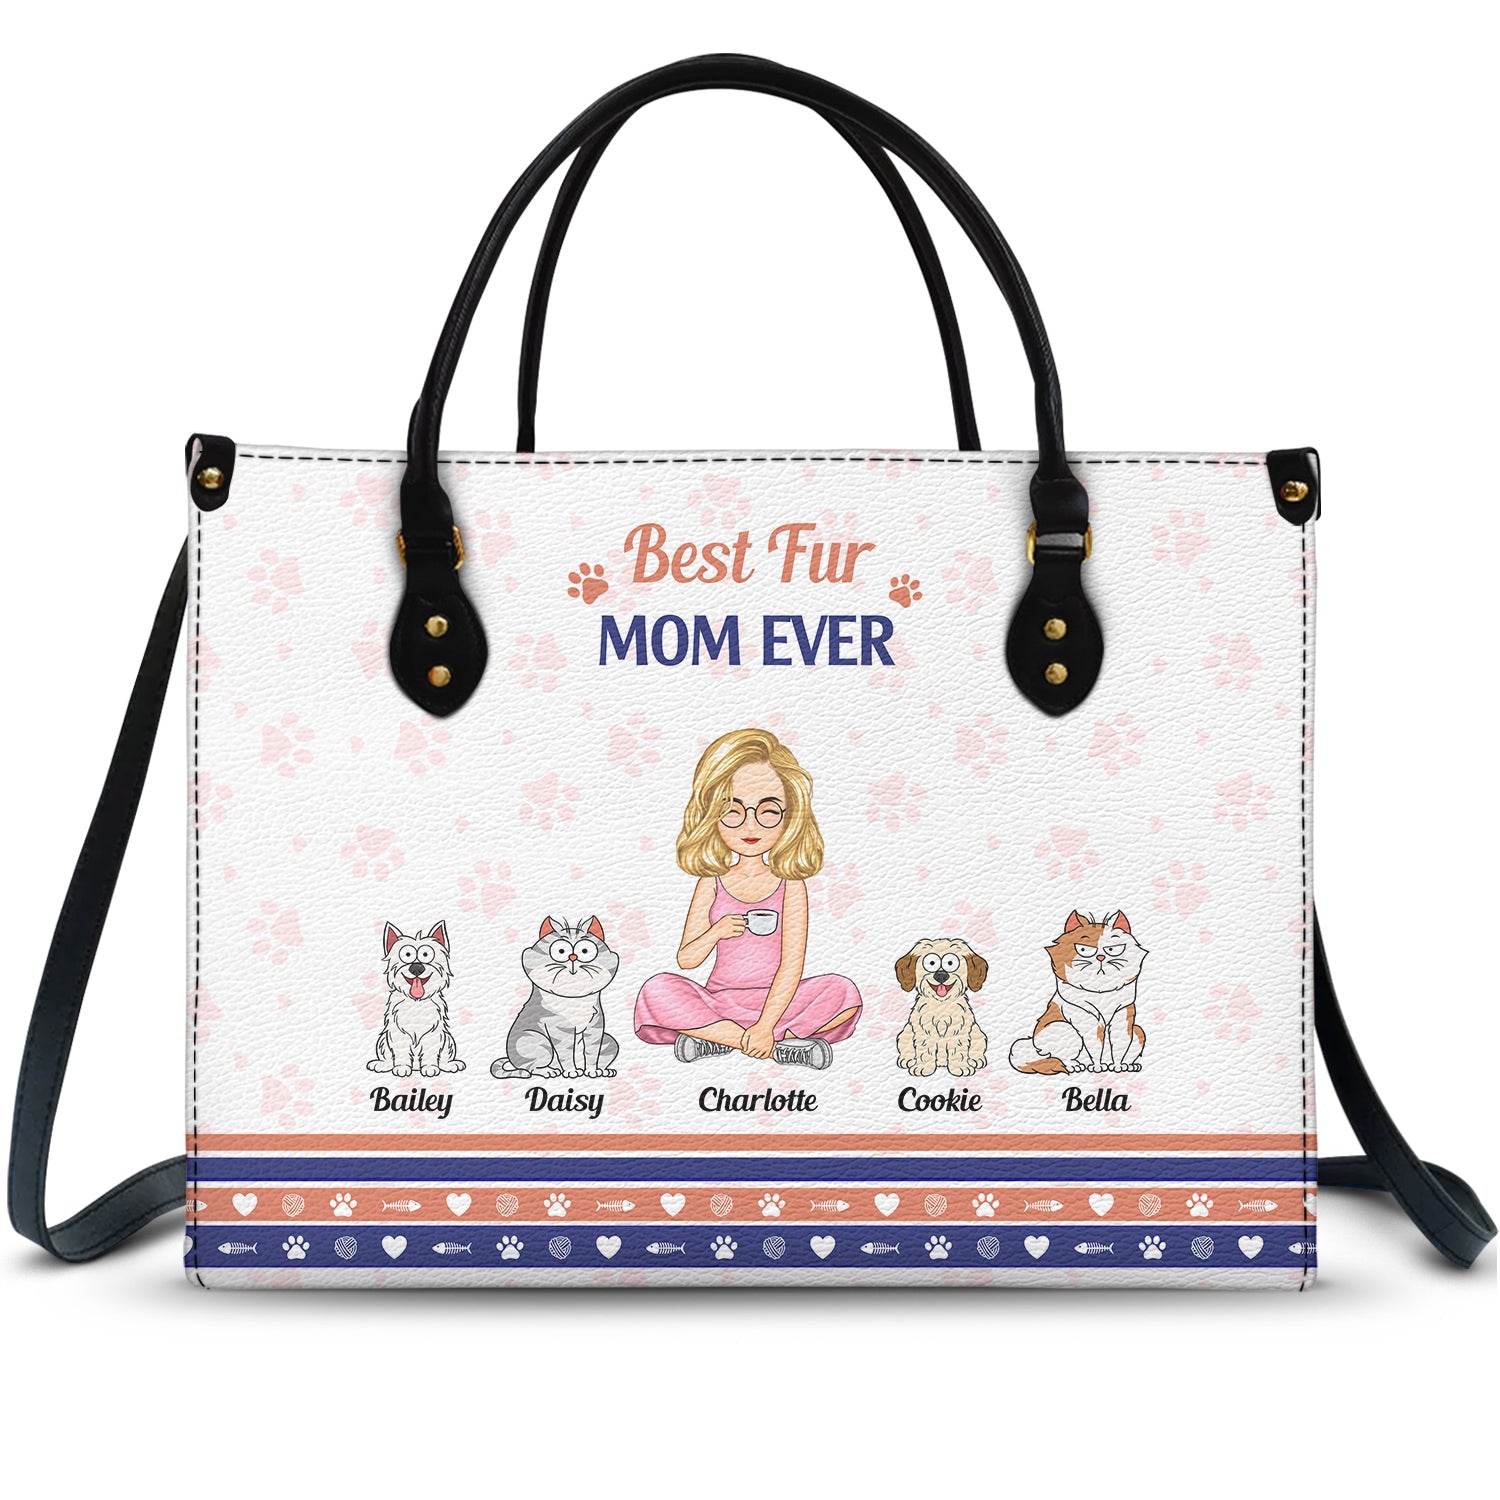 Best Fur Mom Ever - Gift For Dog Mom, Cat Mom, Pet Lovers - Personalized Leather Bag